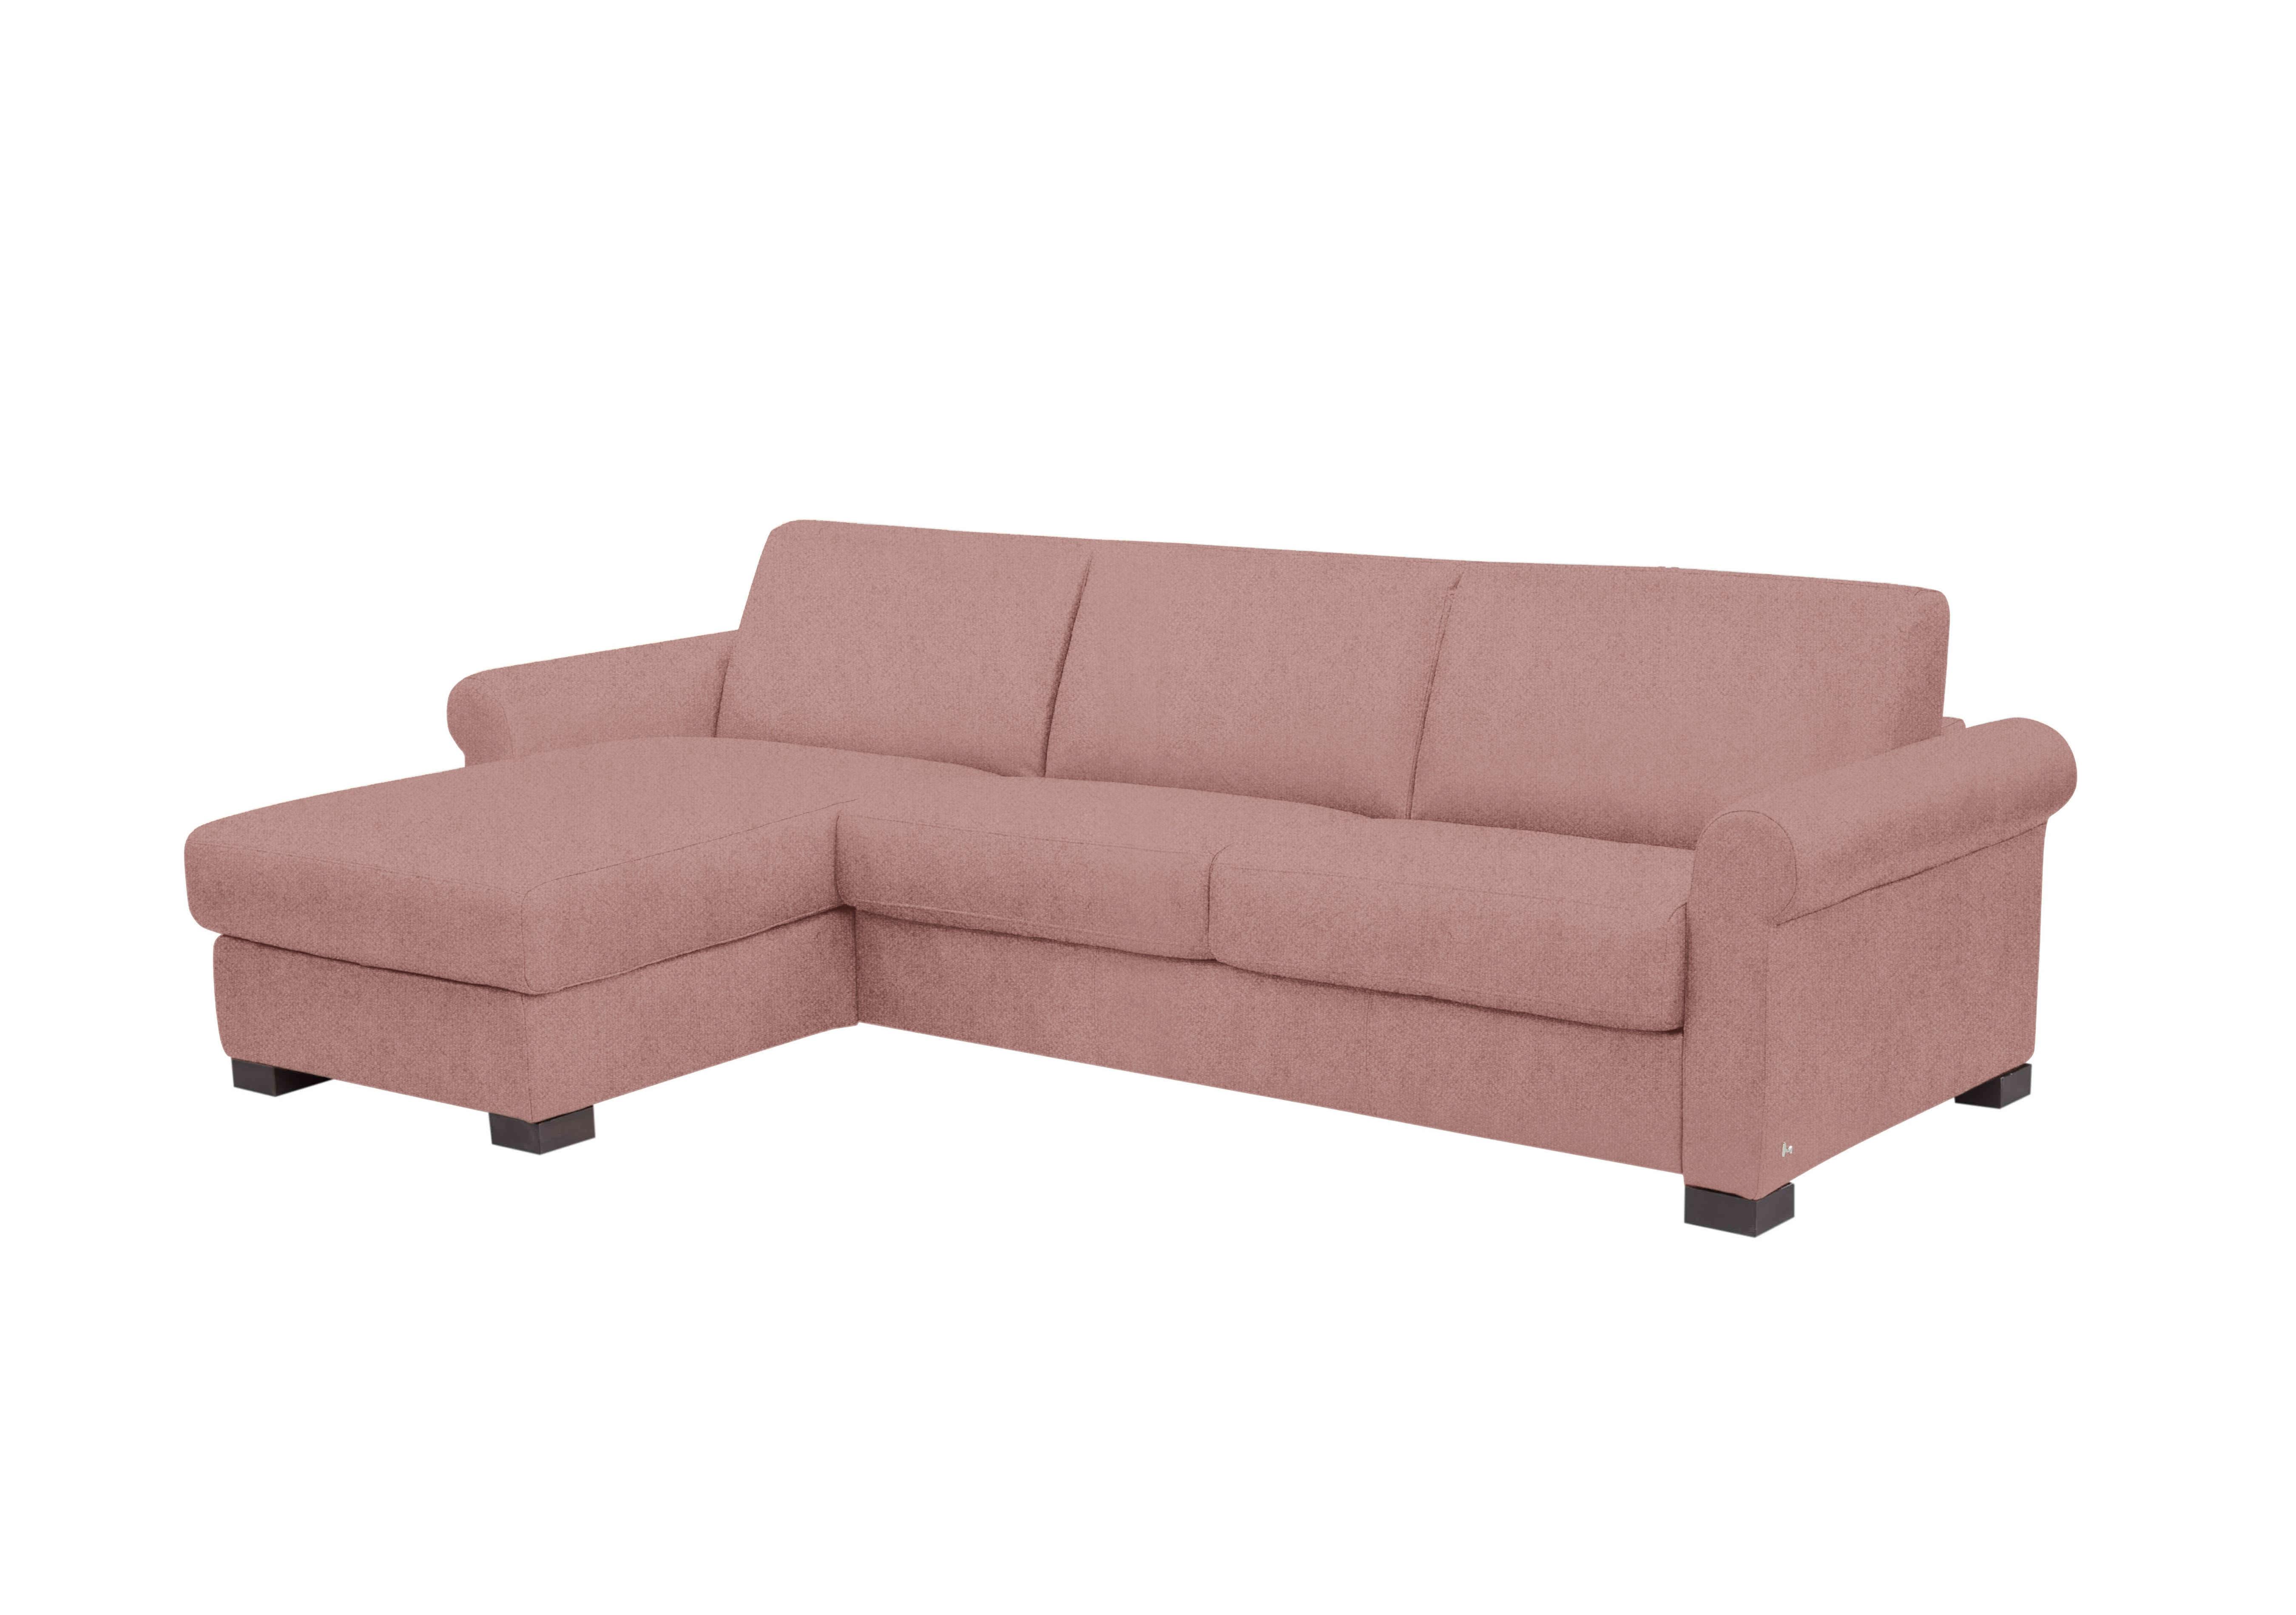 Alcova 3 Seater Fabric Sofa Bed with Storage Chaise with Scroll Arms in Fuente Coral on Furniture Village